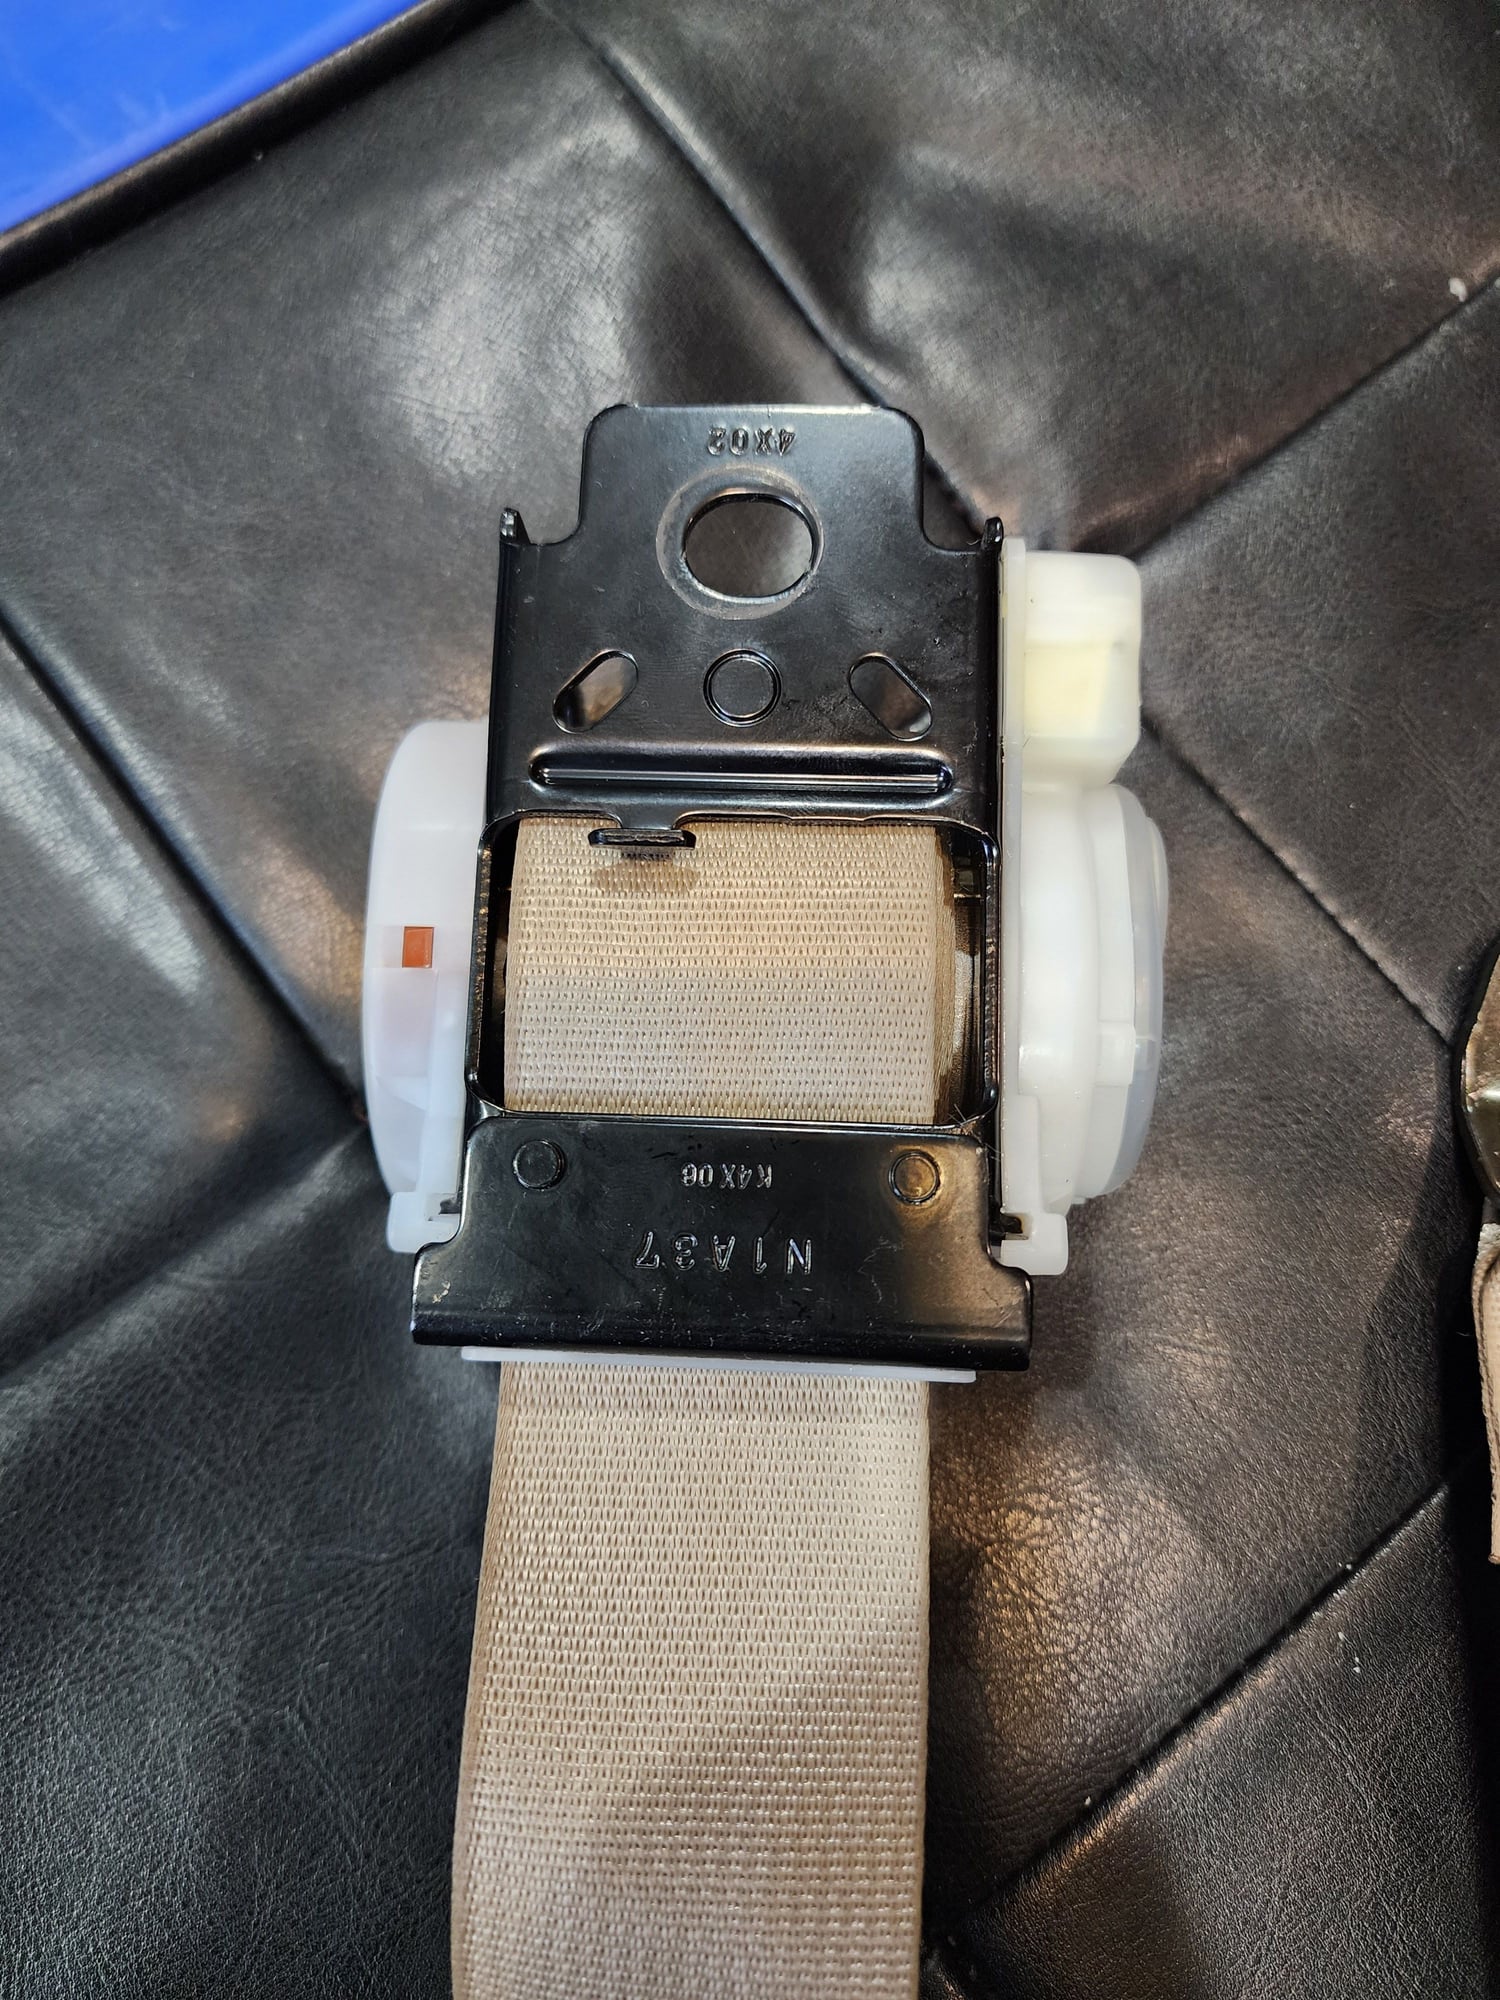 Interior/Upholstery - GX470 Rear Middle Passenger Seat Belt - Used - 2002 to 2008 Lexus GX470 - Harrod, OH 45850, United States